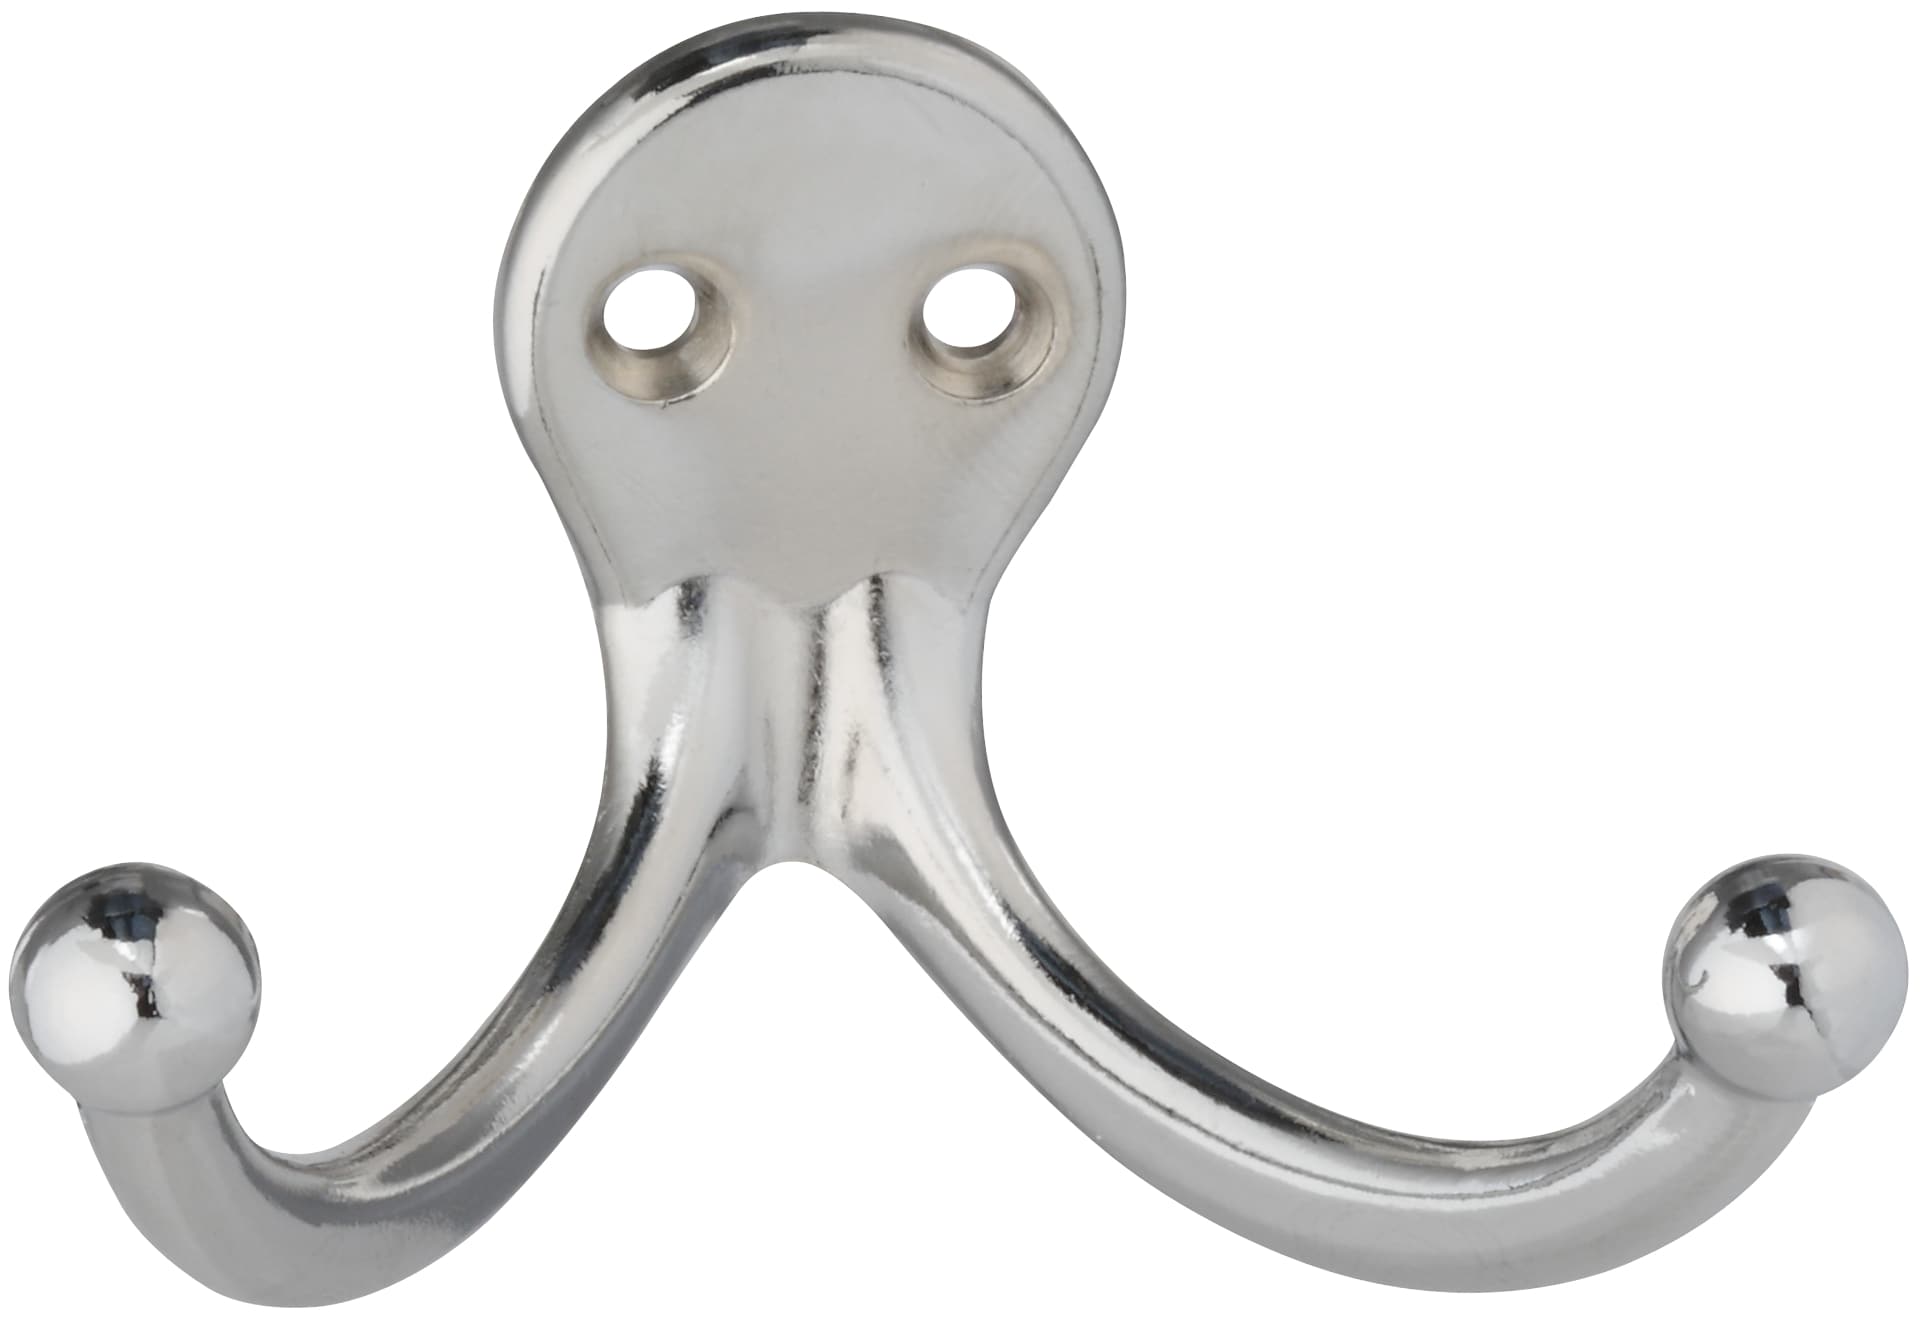 Qty 6 to 100 Nickel Plated or Silver Garment or Clothing Hooks